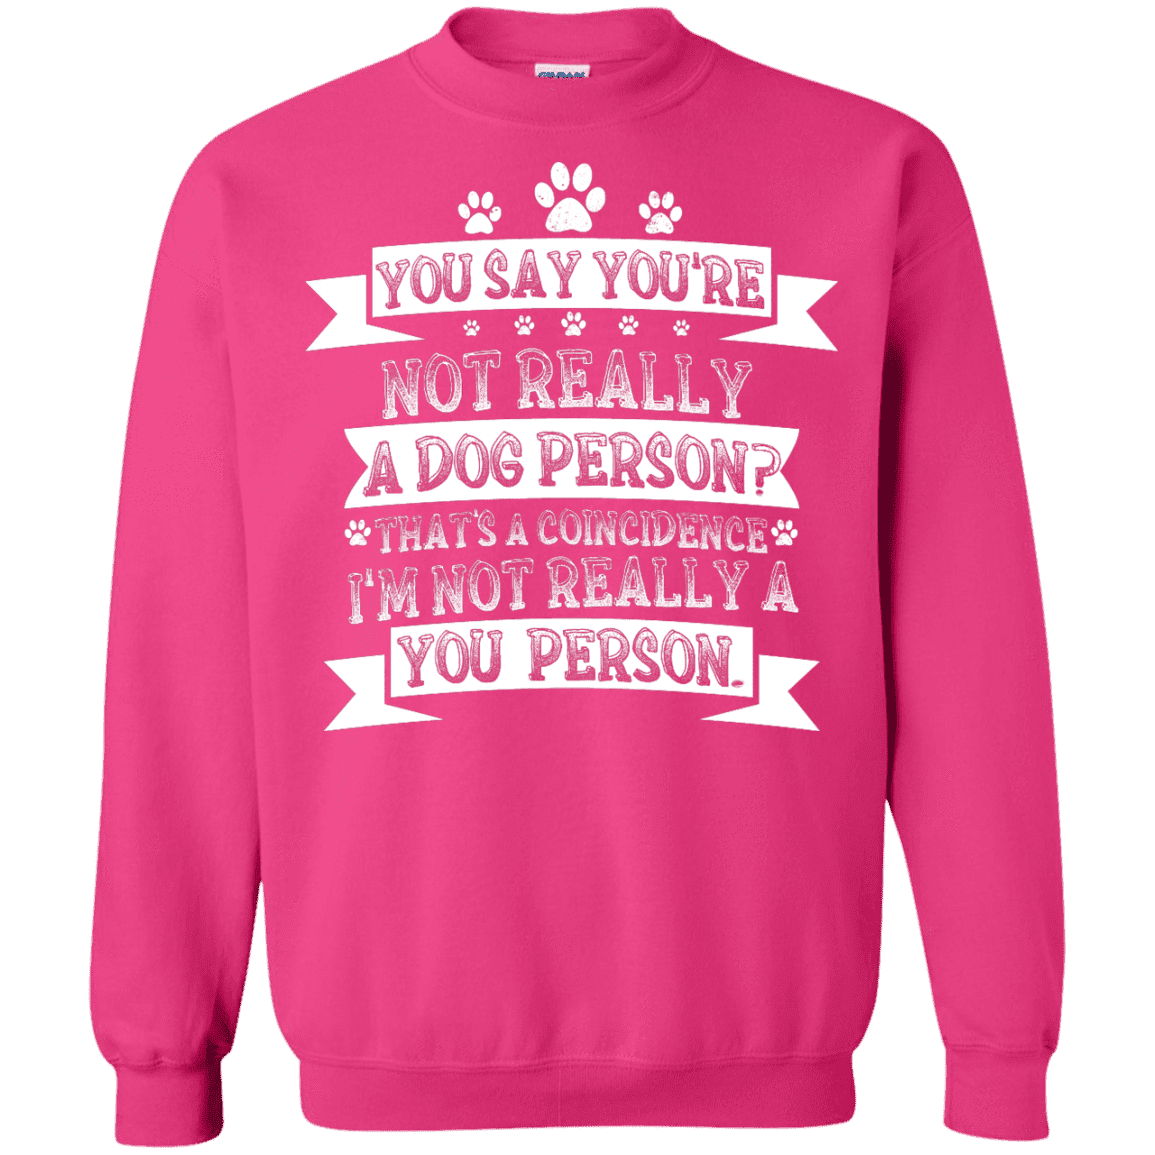 Not Really A You Person - Sweatshirt.